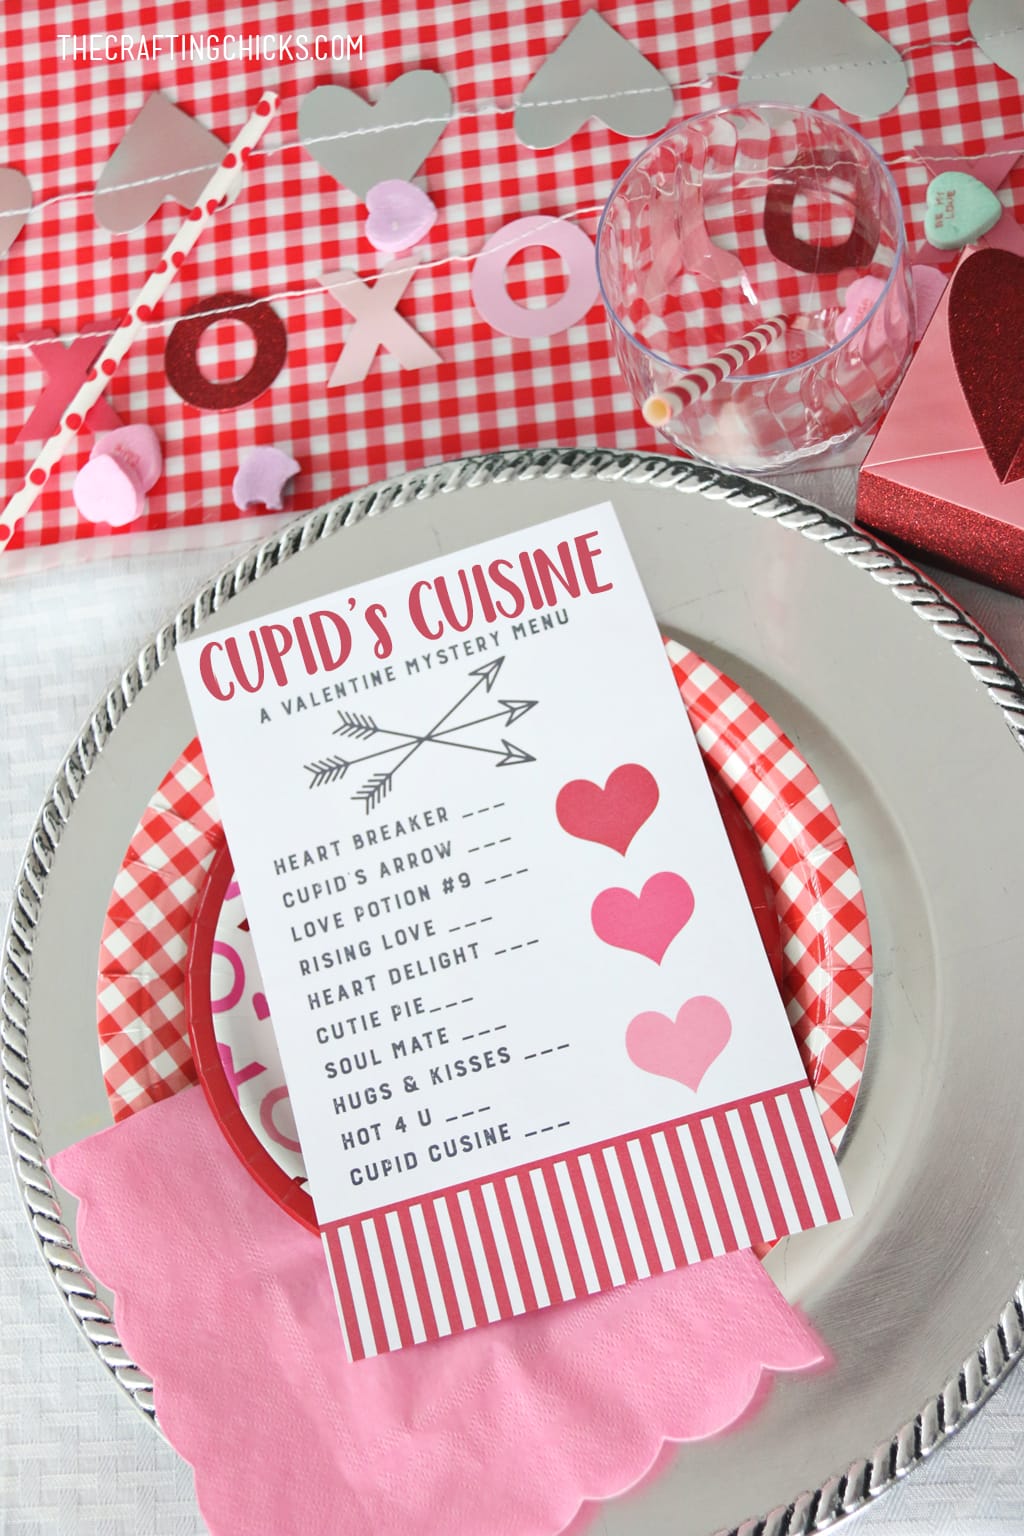 Cupid's Cuisine Valentine's Day Menu for a fun family Valentine's Day Dinner. Kids will love this fun Cupid Mystery Dinner Menu!